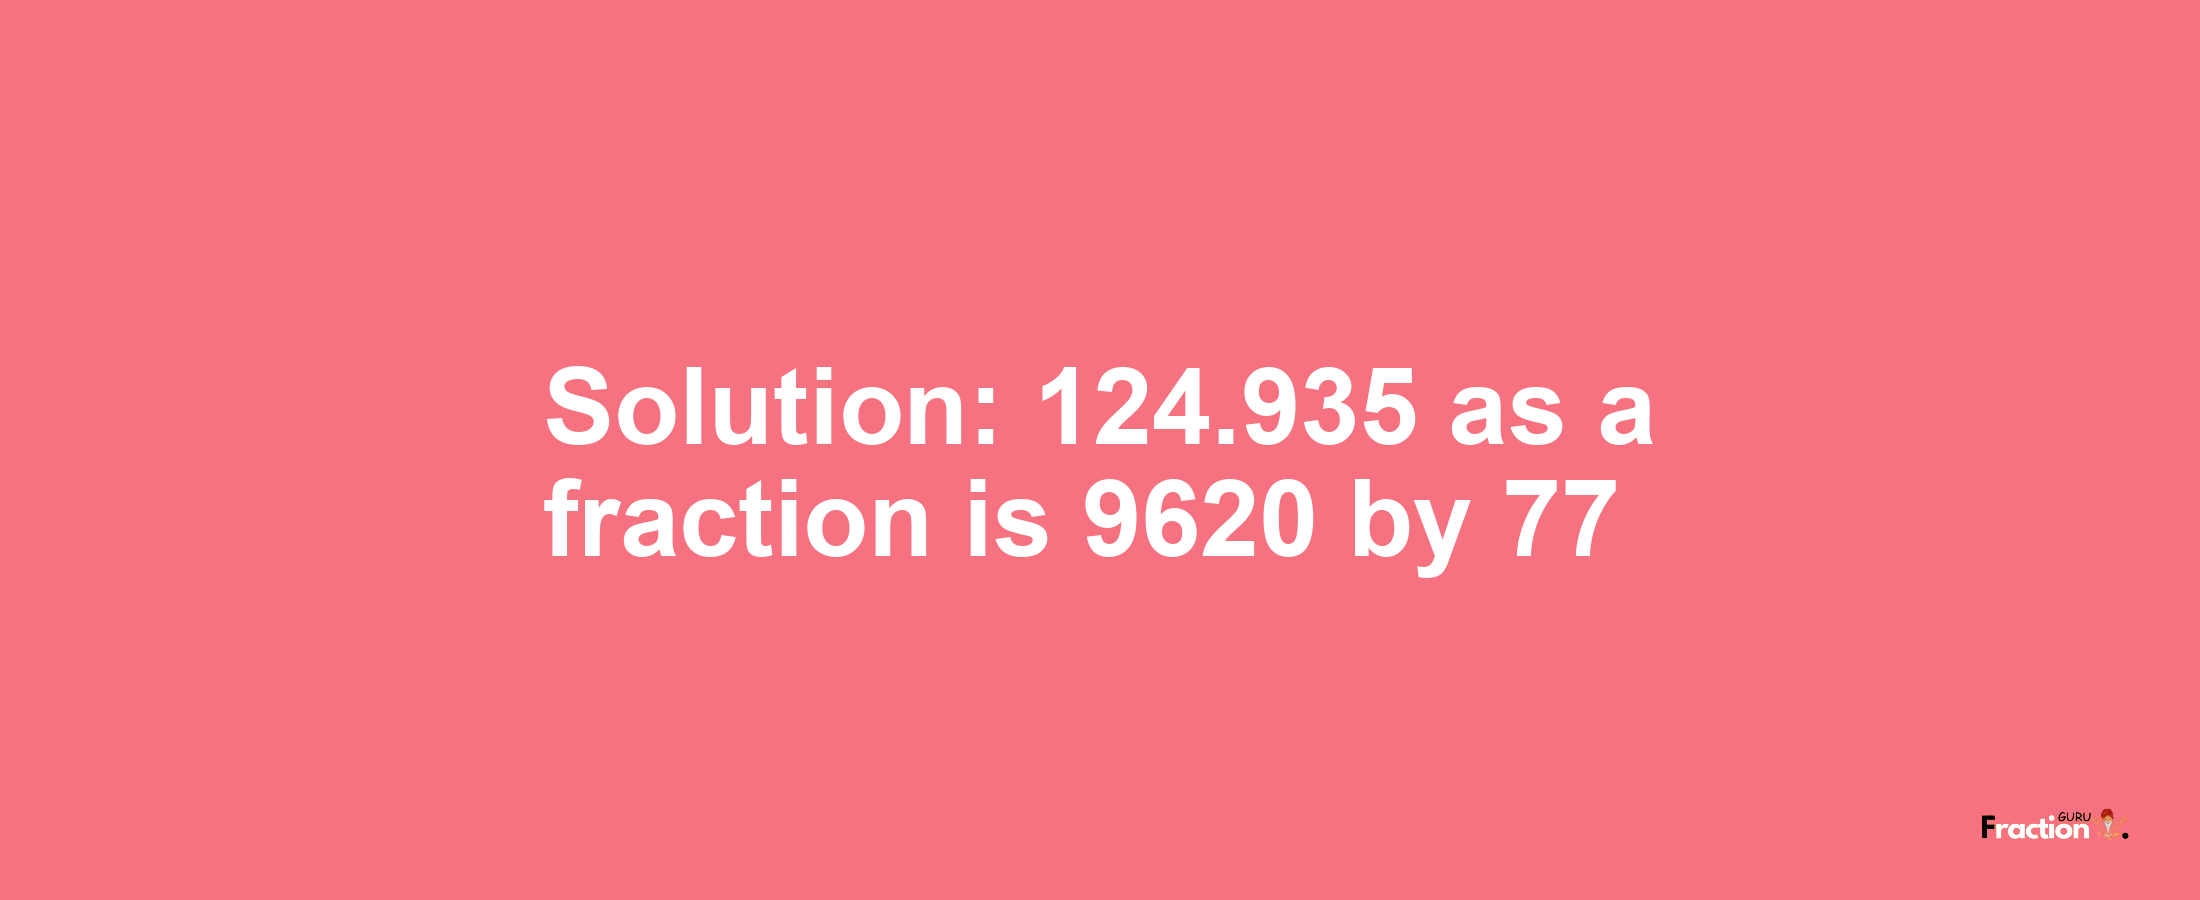 Solution:124.935 as a fraction is 9620/77